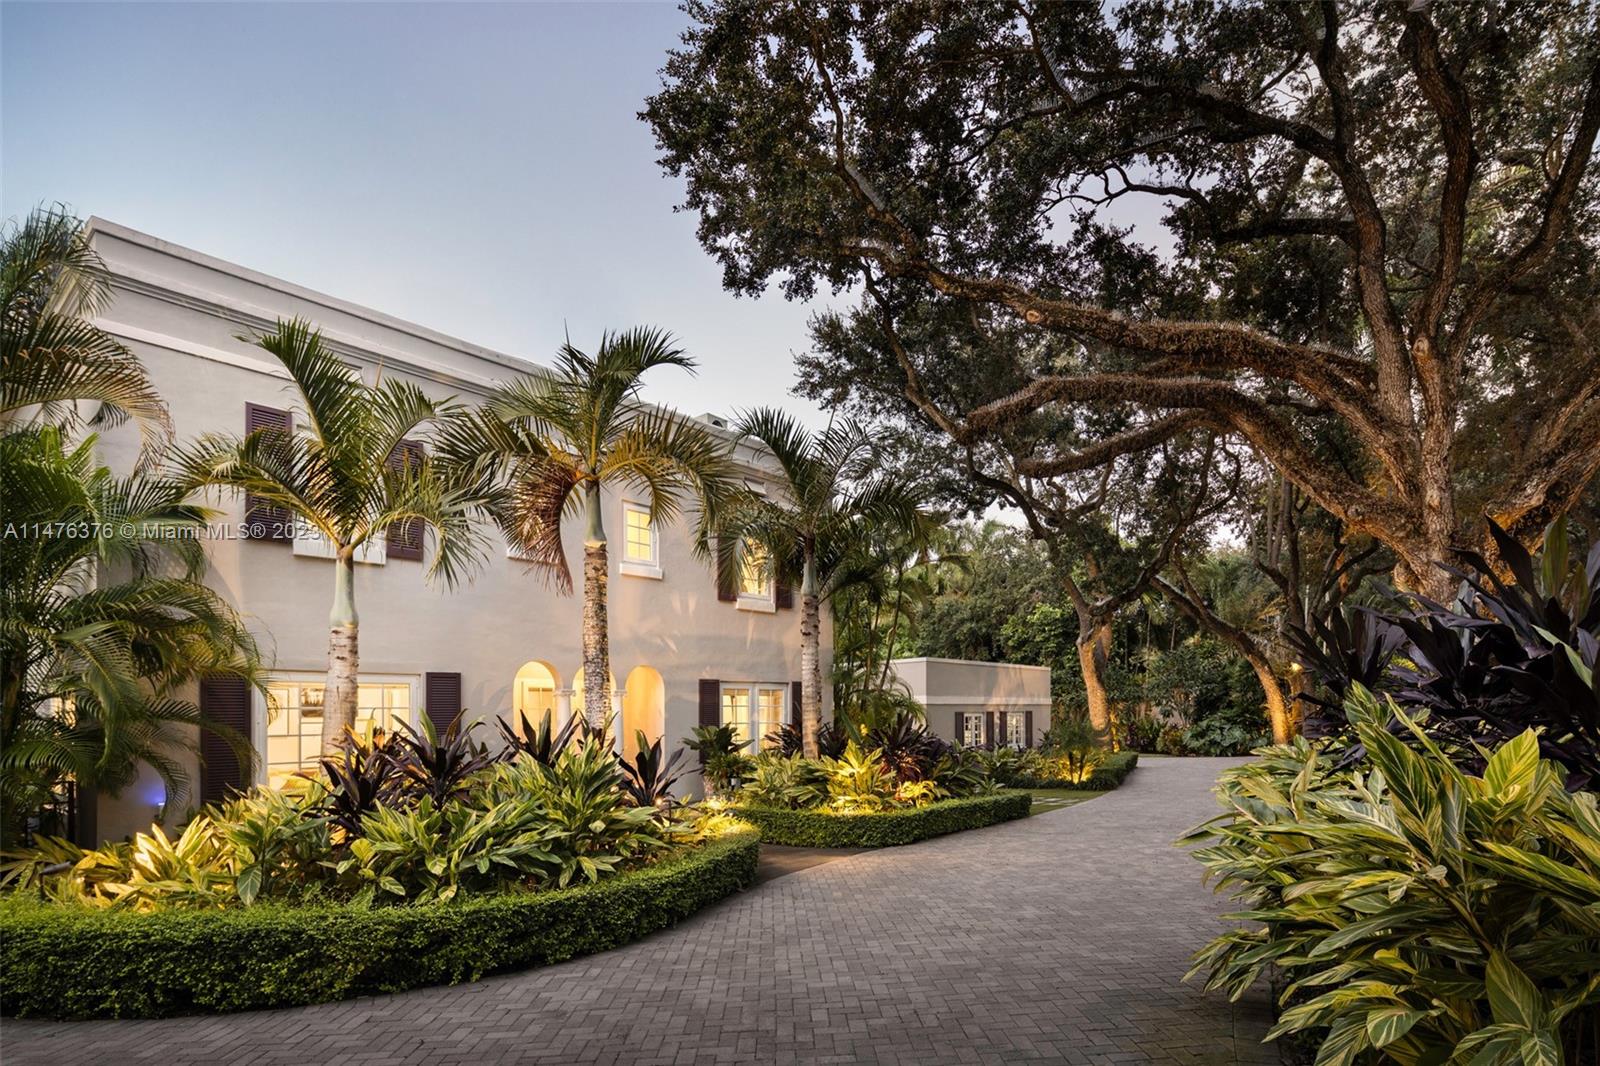 A rare opportunity to own an extraordinary, luxurious, private paradise on the most sought-after street in Coconut Grove-Leafy Way. This spectacular estate, completely rebuilt in 2017 sits on a majestic 28,314 sq ft lot.This home boasts endless sunlit spaces throughout its open layout and exudes warmth and sophistication, with indoor living spaces flowing effortlessly to the expansive outdoors.Mature trees shade the spectacular pool and garden. A home without compare, with a glamorous 'movie-set' pool that is luxurious, secluded and basks in natural splendor. Guest house offers versatility as office, guest suite, or in-law quarters.Located outside the flood zone and equipped with a 38kw generator, providing peace of mind. A dazzling gem to complement your luxurious, refined lifestyle.